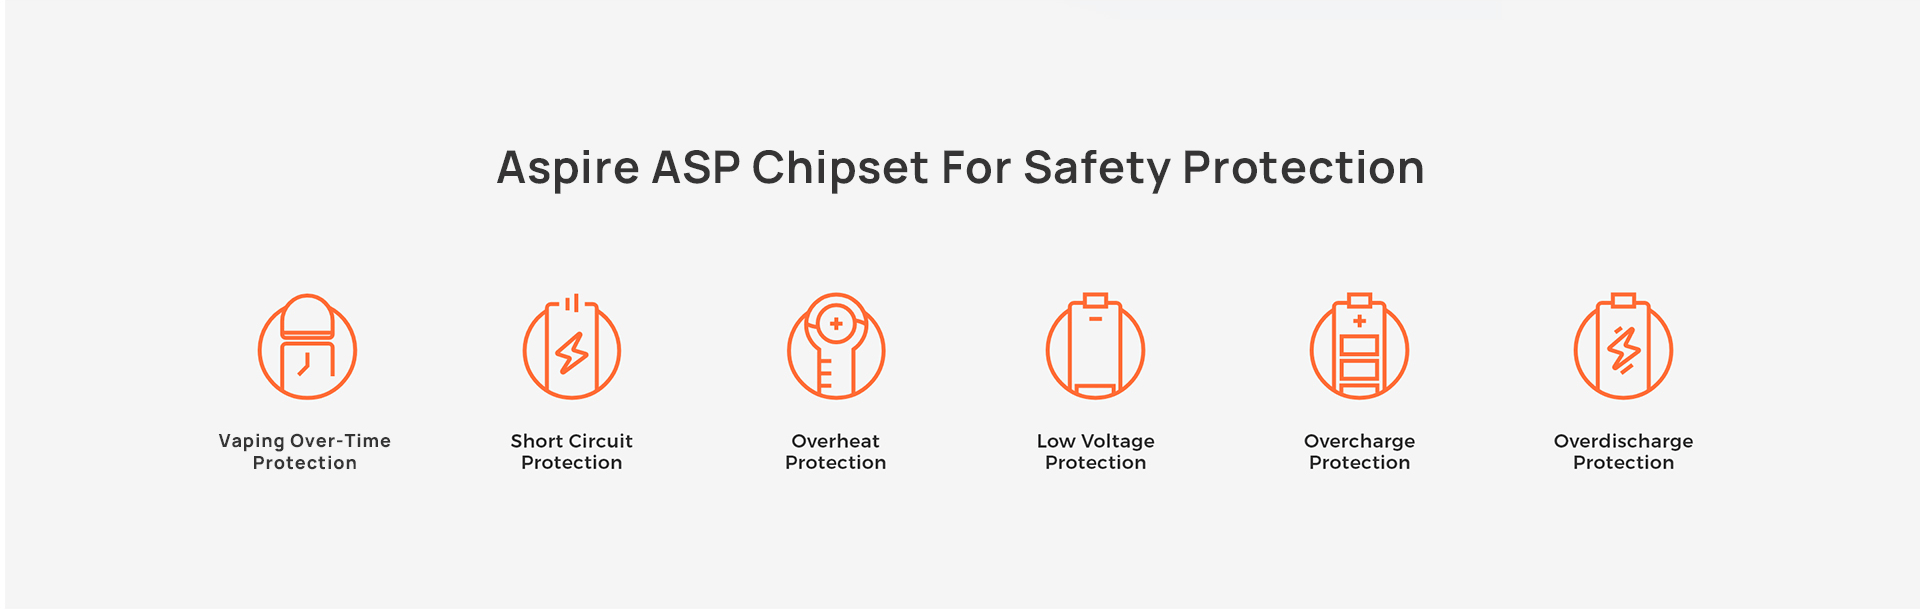 Aspire ASP Chipset For Safety Protection | Aspire Cyber S